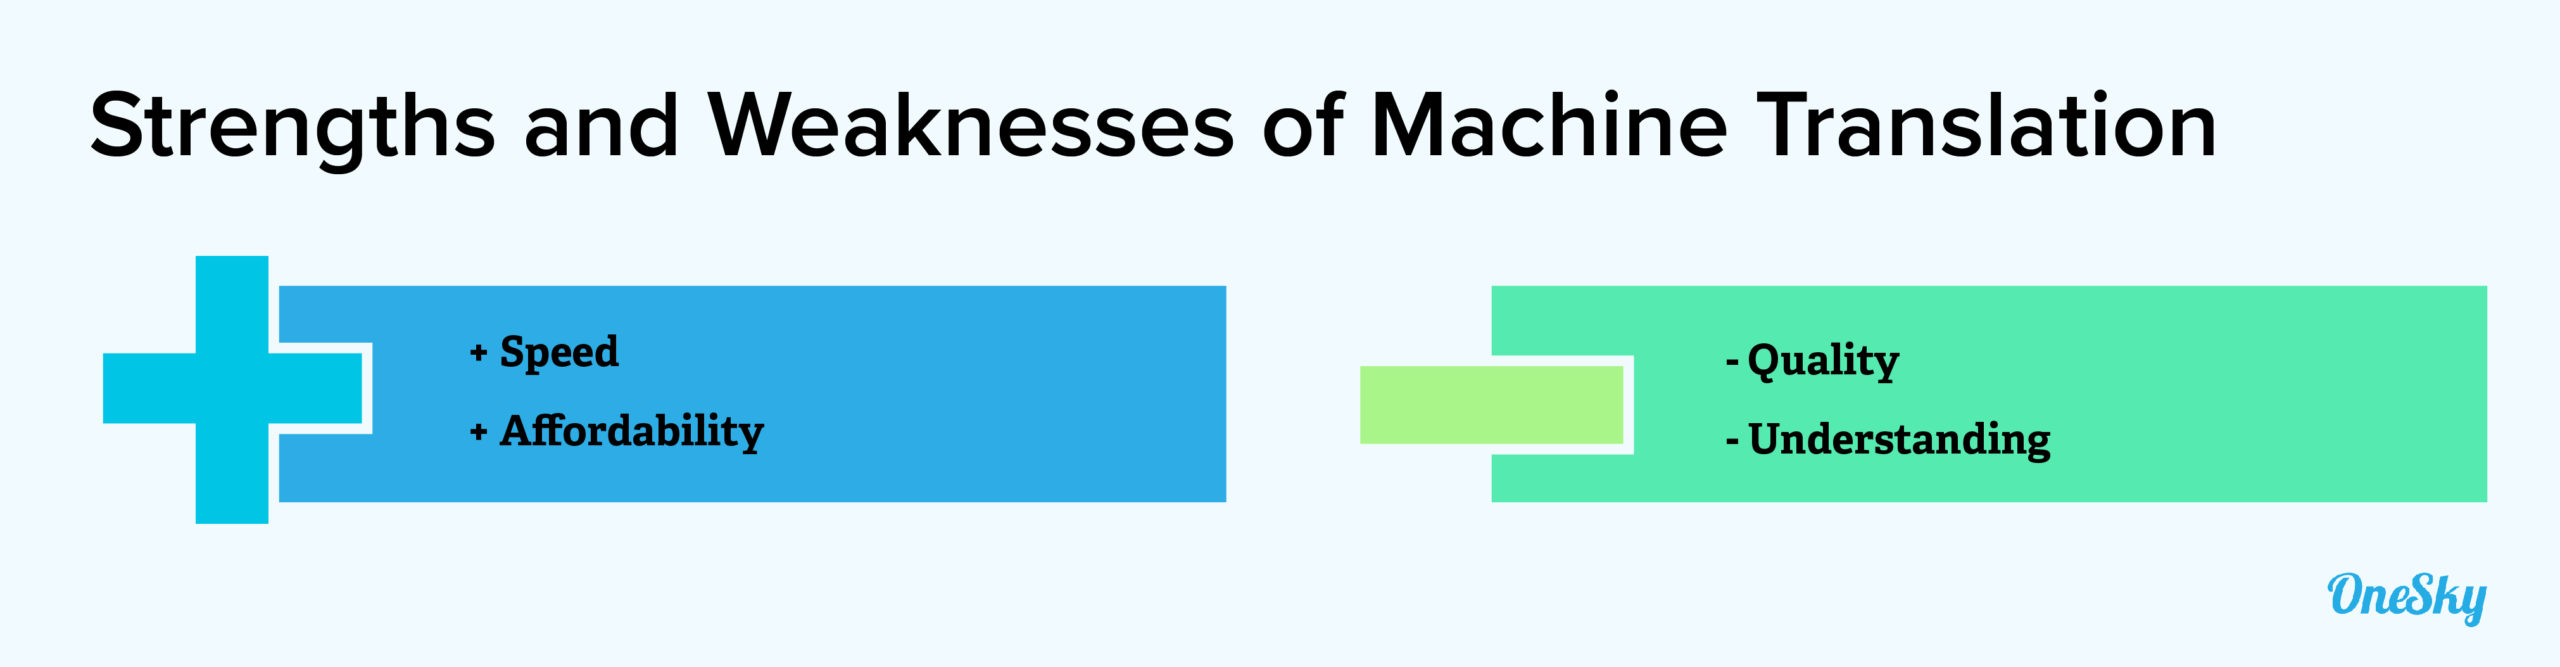 strengths and weaknesses of machine translation